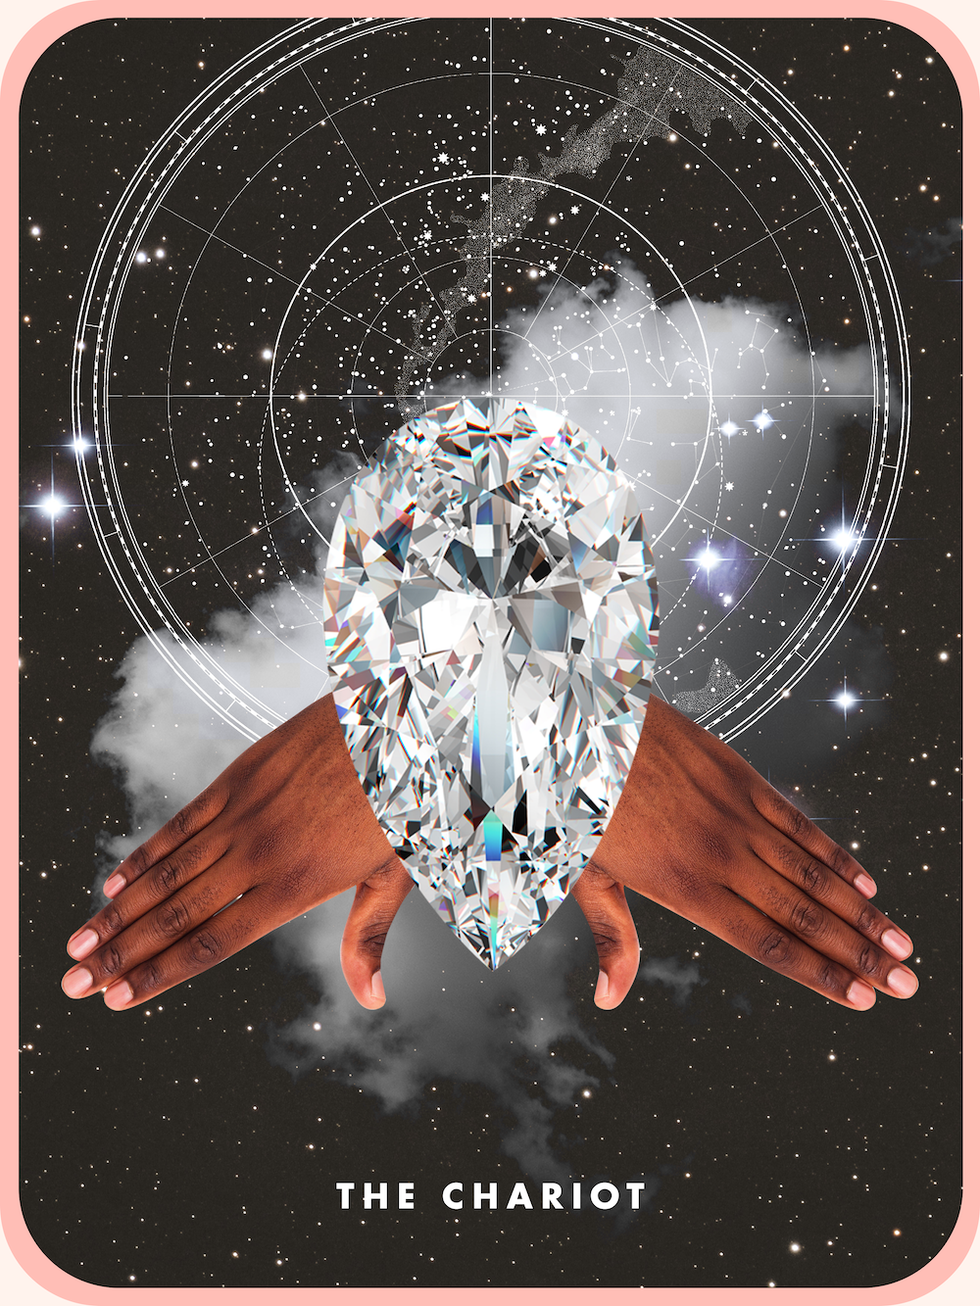 the tarot card the chariot, showing two hands beneath a diamond and a circle in a starry sky